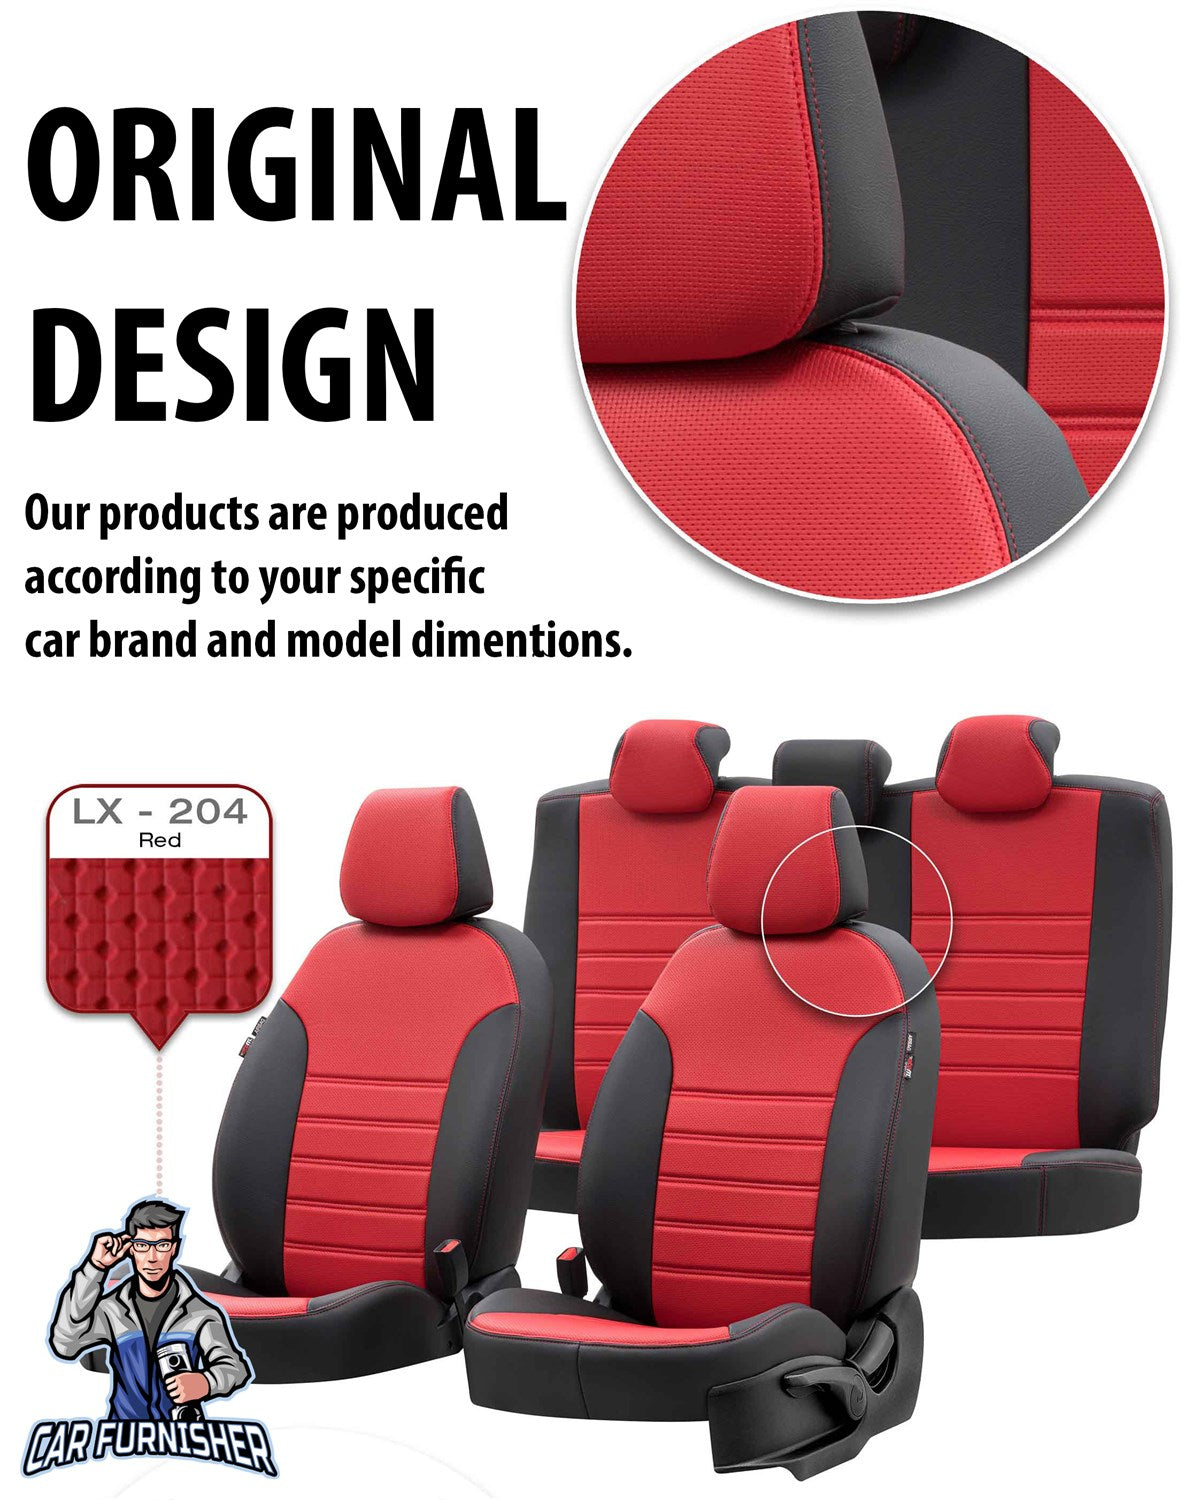 Skoda Rapid Seat Covers New York Leather Design Smoked Black Leather